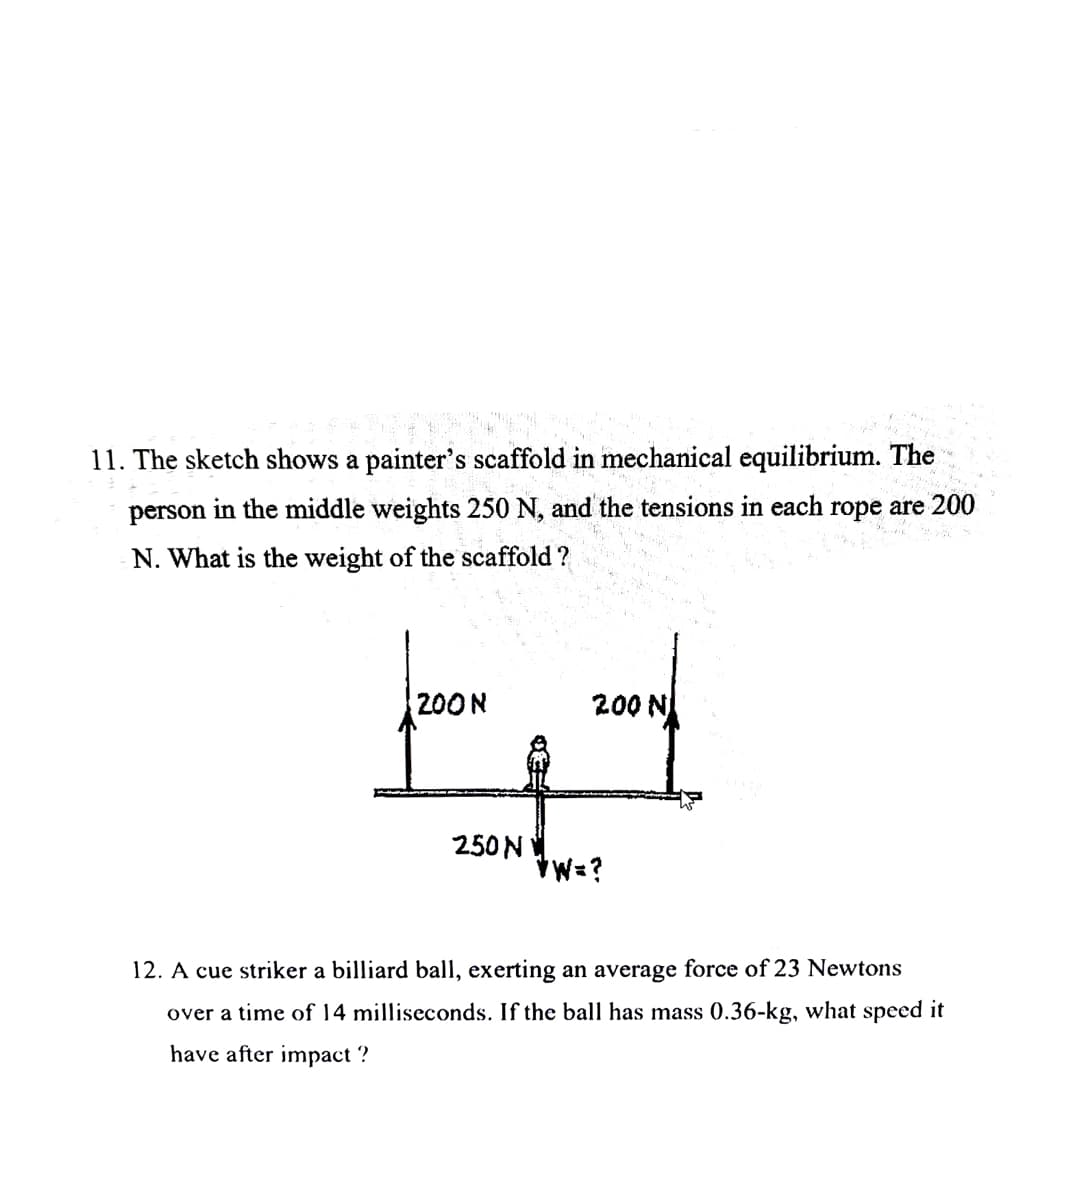 11. The sketch shows a painter's scaffold in mechanical equilibrium. The
person in the middle weights 250 N, and the tensions in each rope are 200
N. What is the weight of the scaffold?
200 N
Ad
250 N
*W=?
א 200
12. A cue striker a billiard ball, exerting an average force of 23 Newtons
over a time of 14 milliseconds. If the ball has mass 0.36-kg, what speed it
have after impact ?